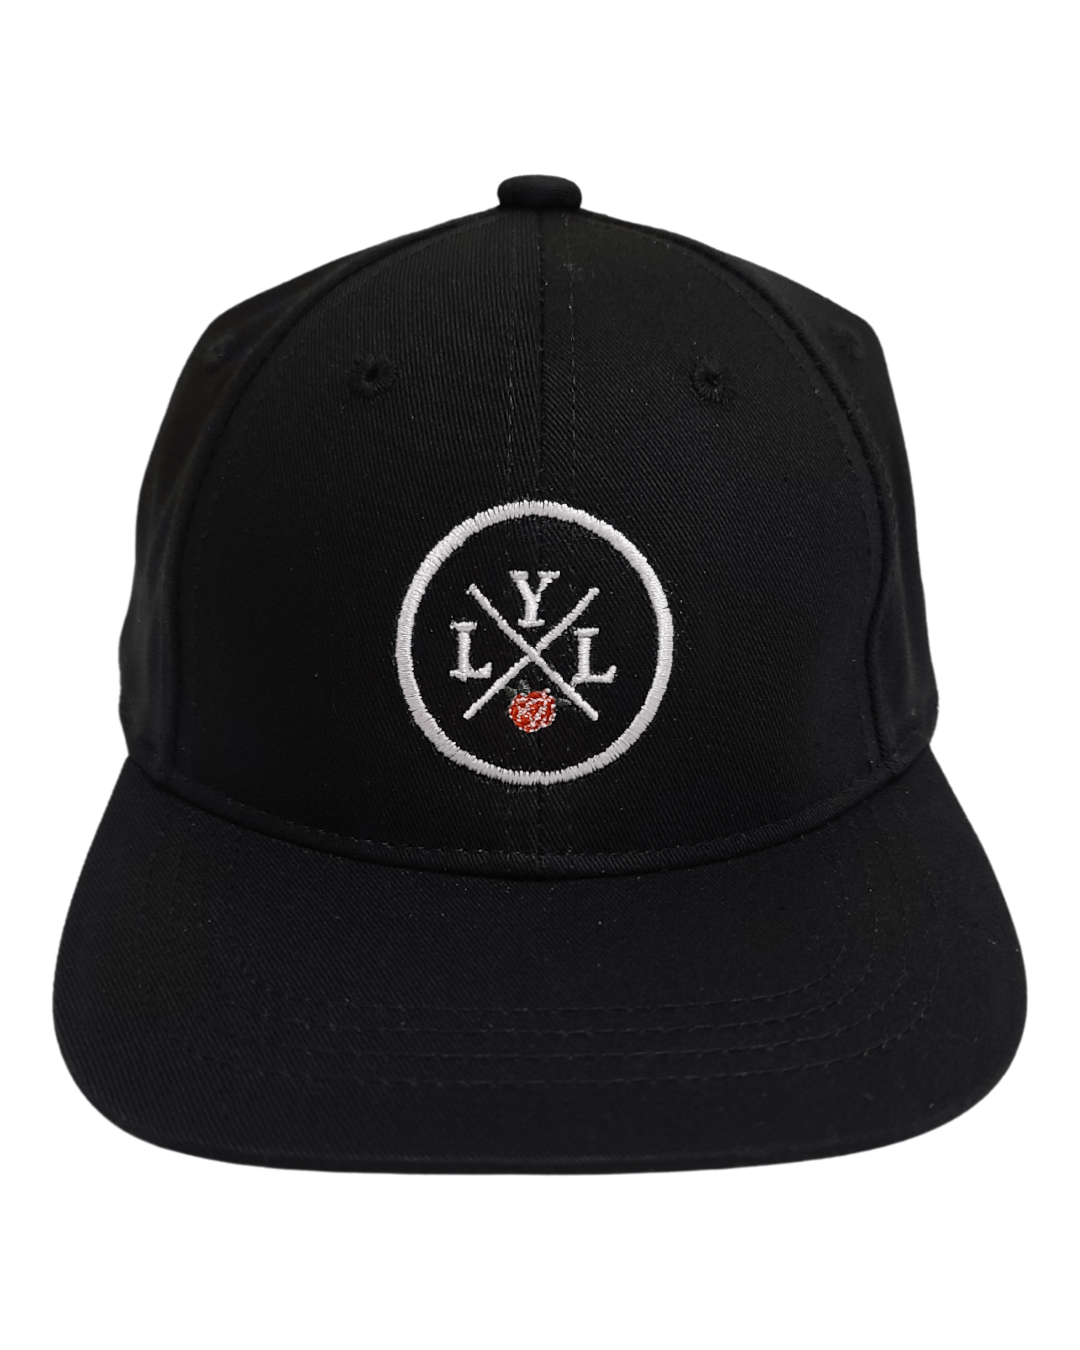 Kids Classic LyL Snapback - Leave Your Legacy Clothing